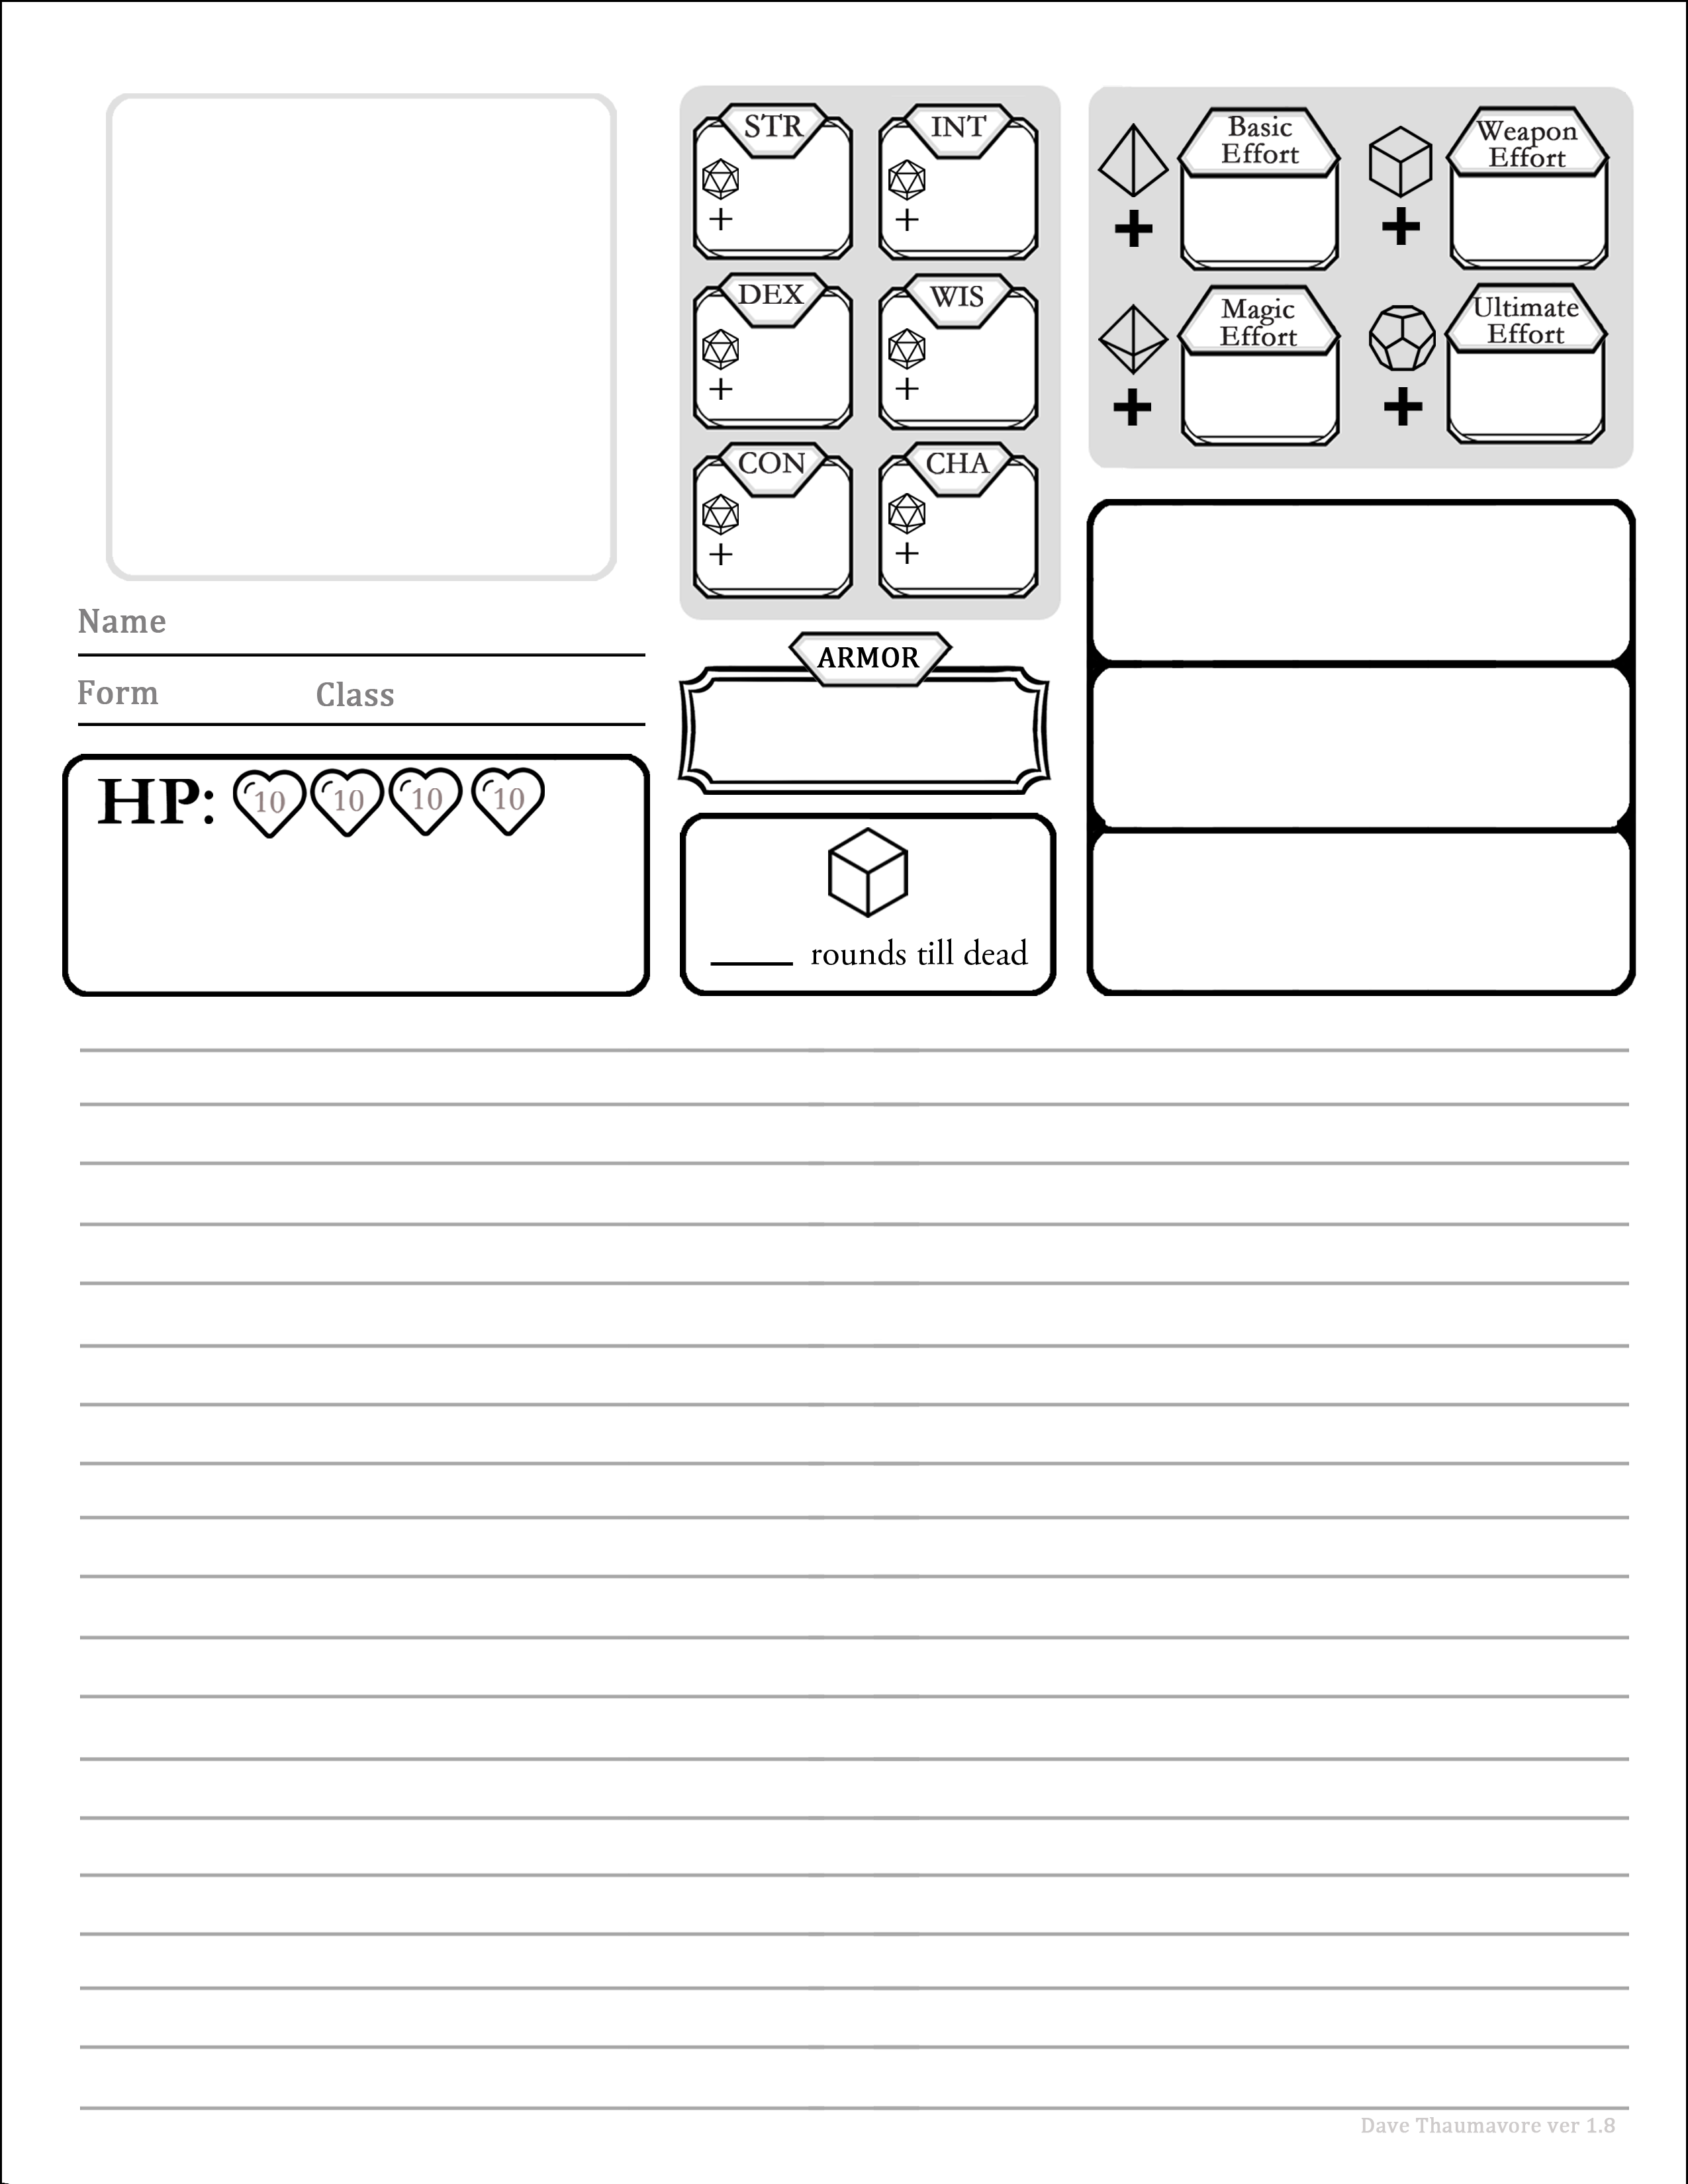 Simple But Quite Cute Dnd Character Sheet Rpg Charact - vrogue.co